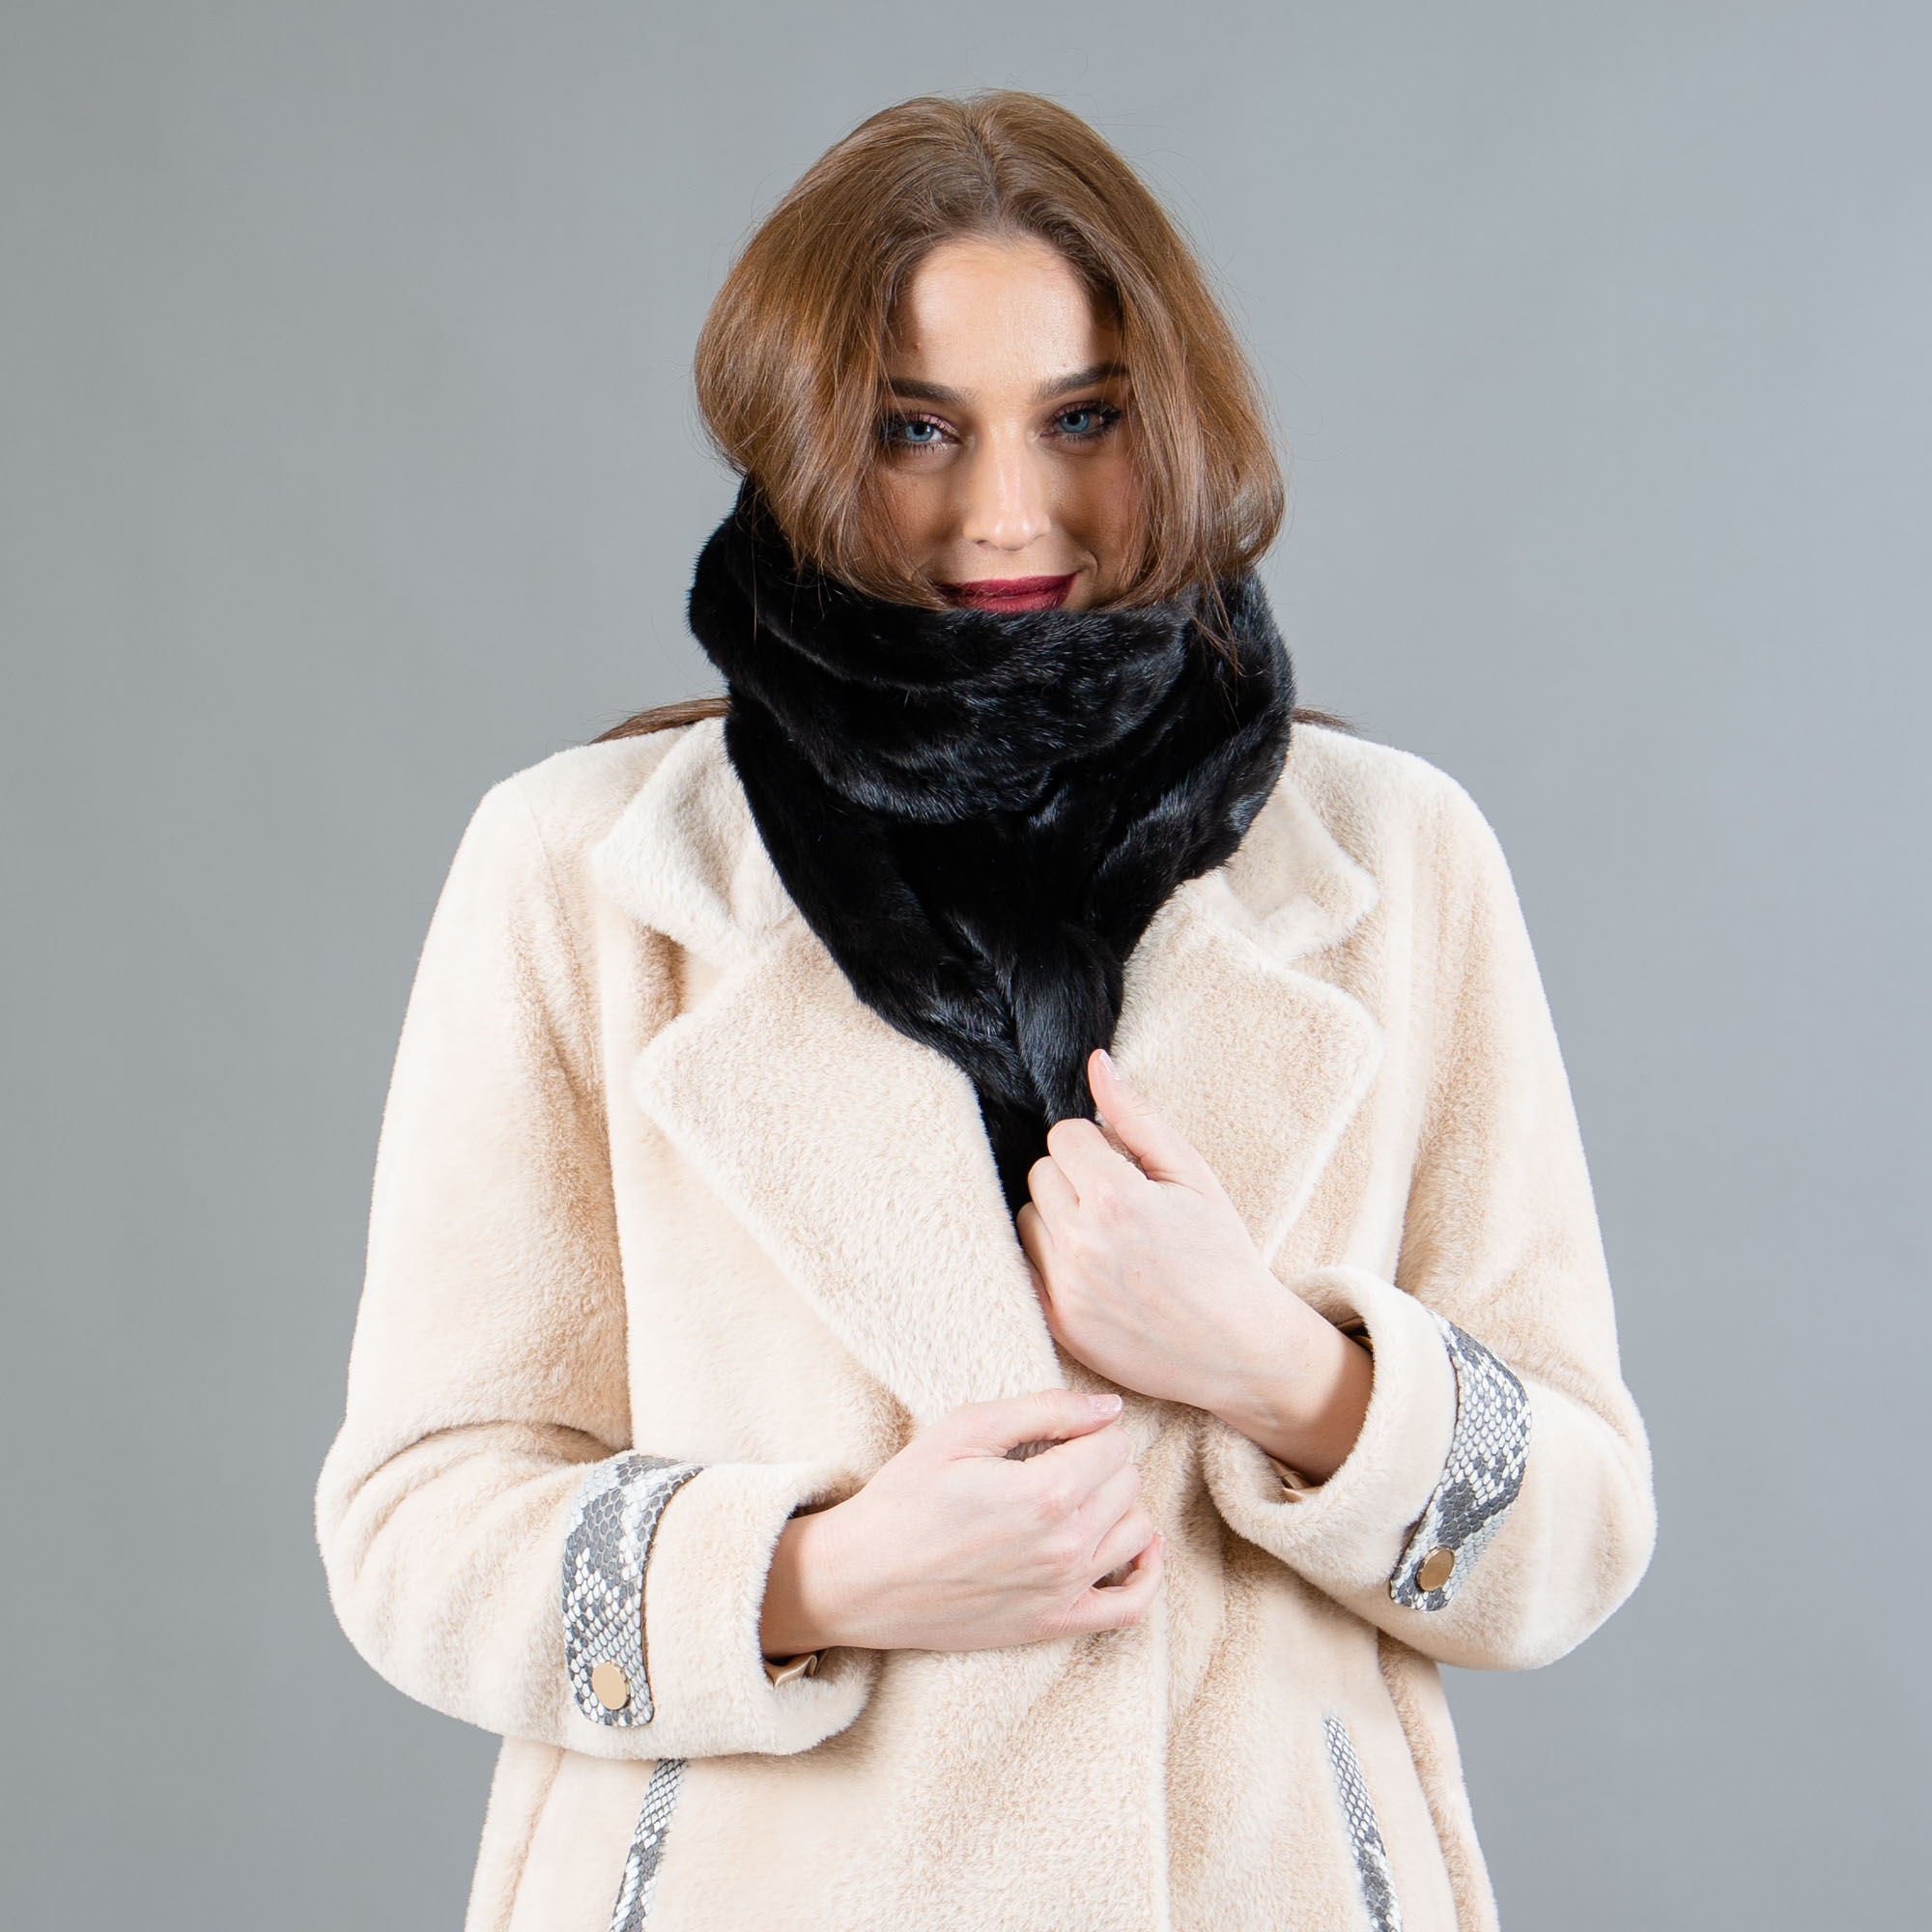 100% Real Fur Coats & Jackets, Leathers & Accessories - eFurs